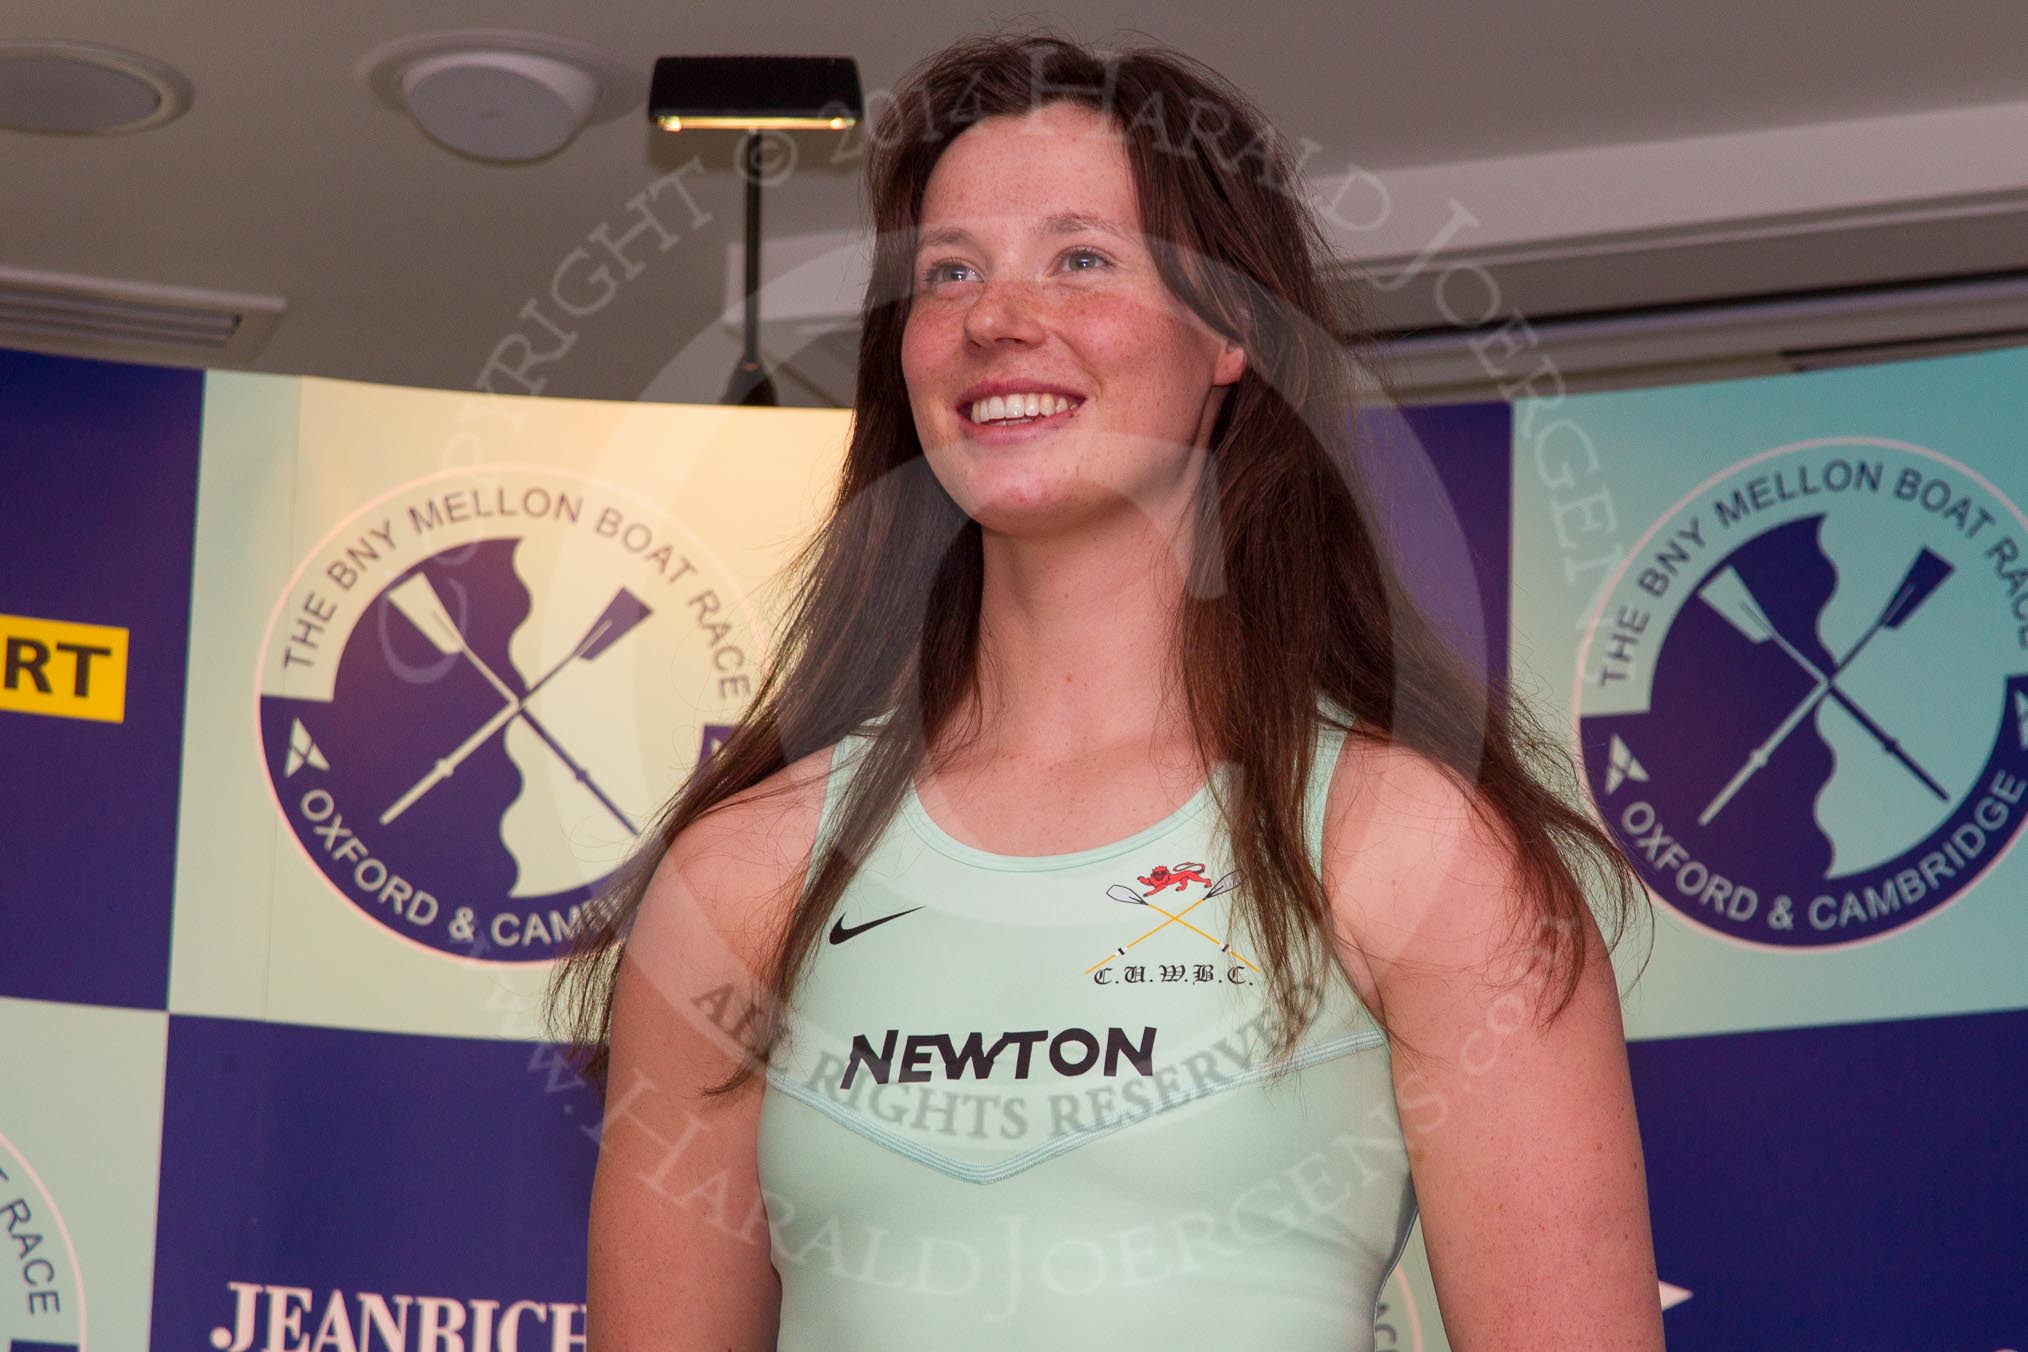 The Boat Race season 2014 - Crew Announcement and Weigh In: The 2014 Women's Boat Race crews: Cambridge 5 seat Catherine Foot - 71kg..
BNY Mellon Centre,
London EC4V 4LA,
London,
United Kingdom,
on 10 March 2014 at 11:47, image #35